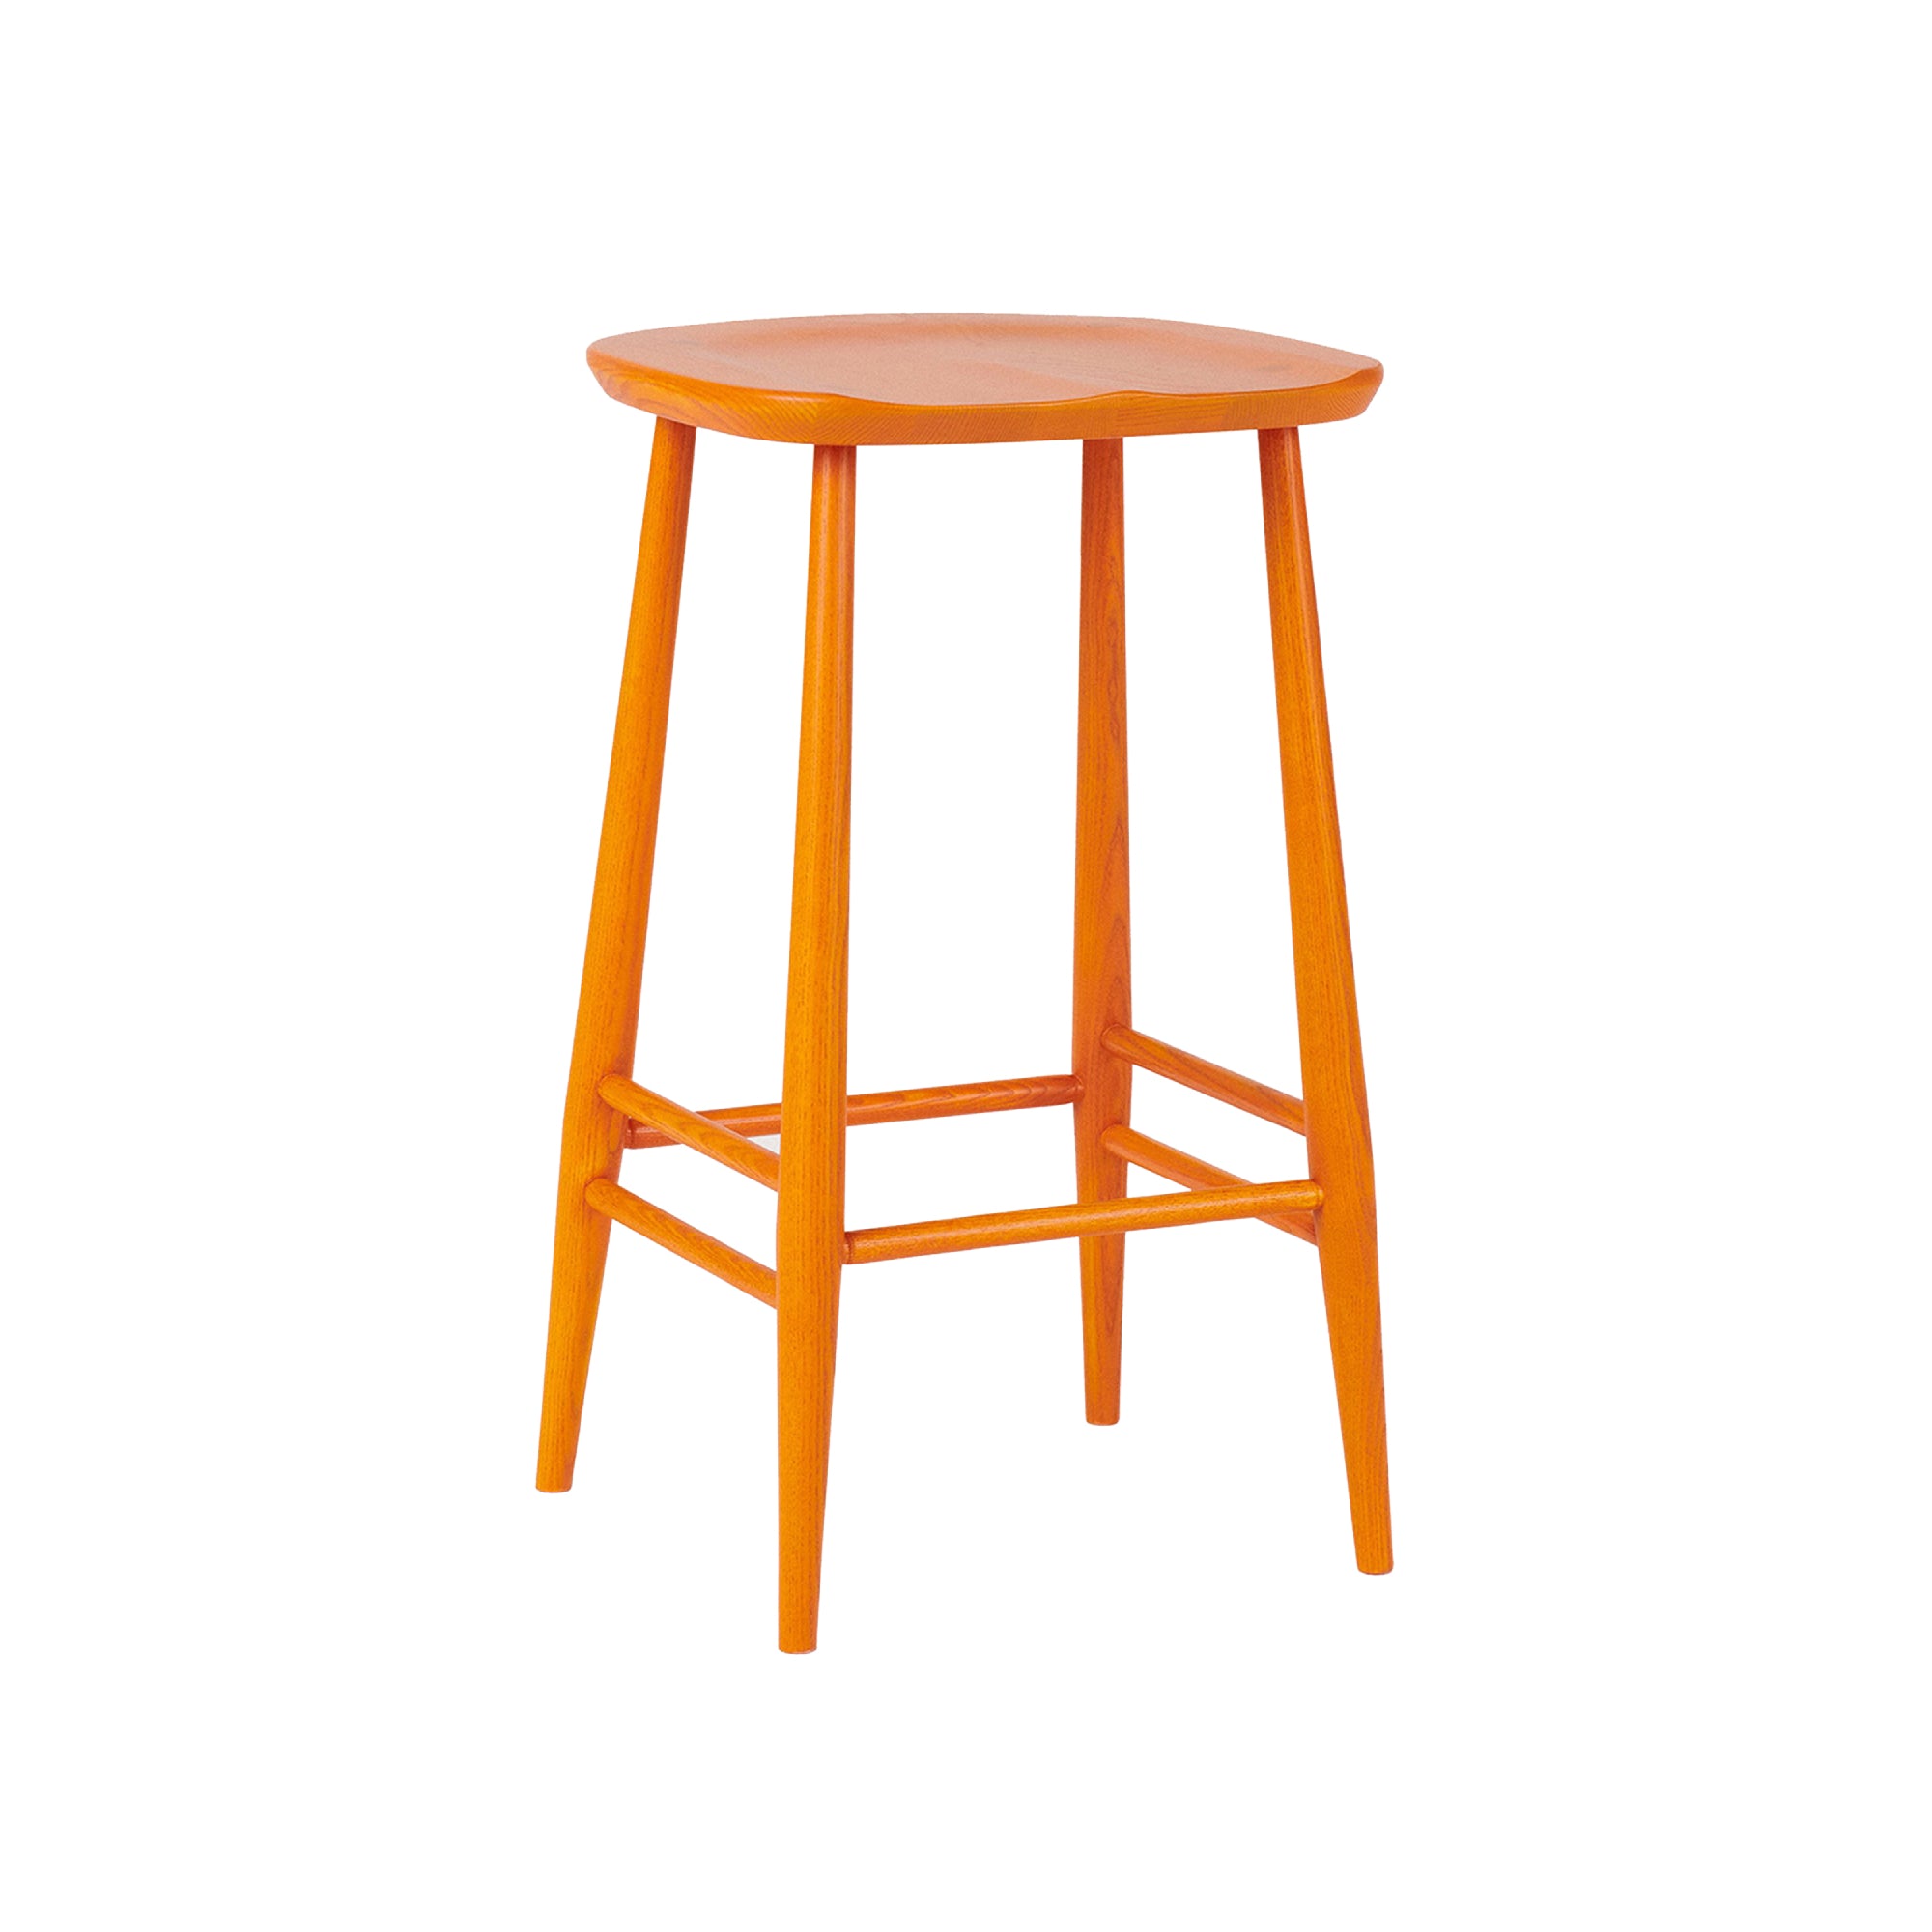 Originals Utility Bar + Counter Stool: Counter + Stained Ochre